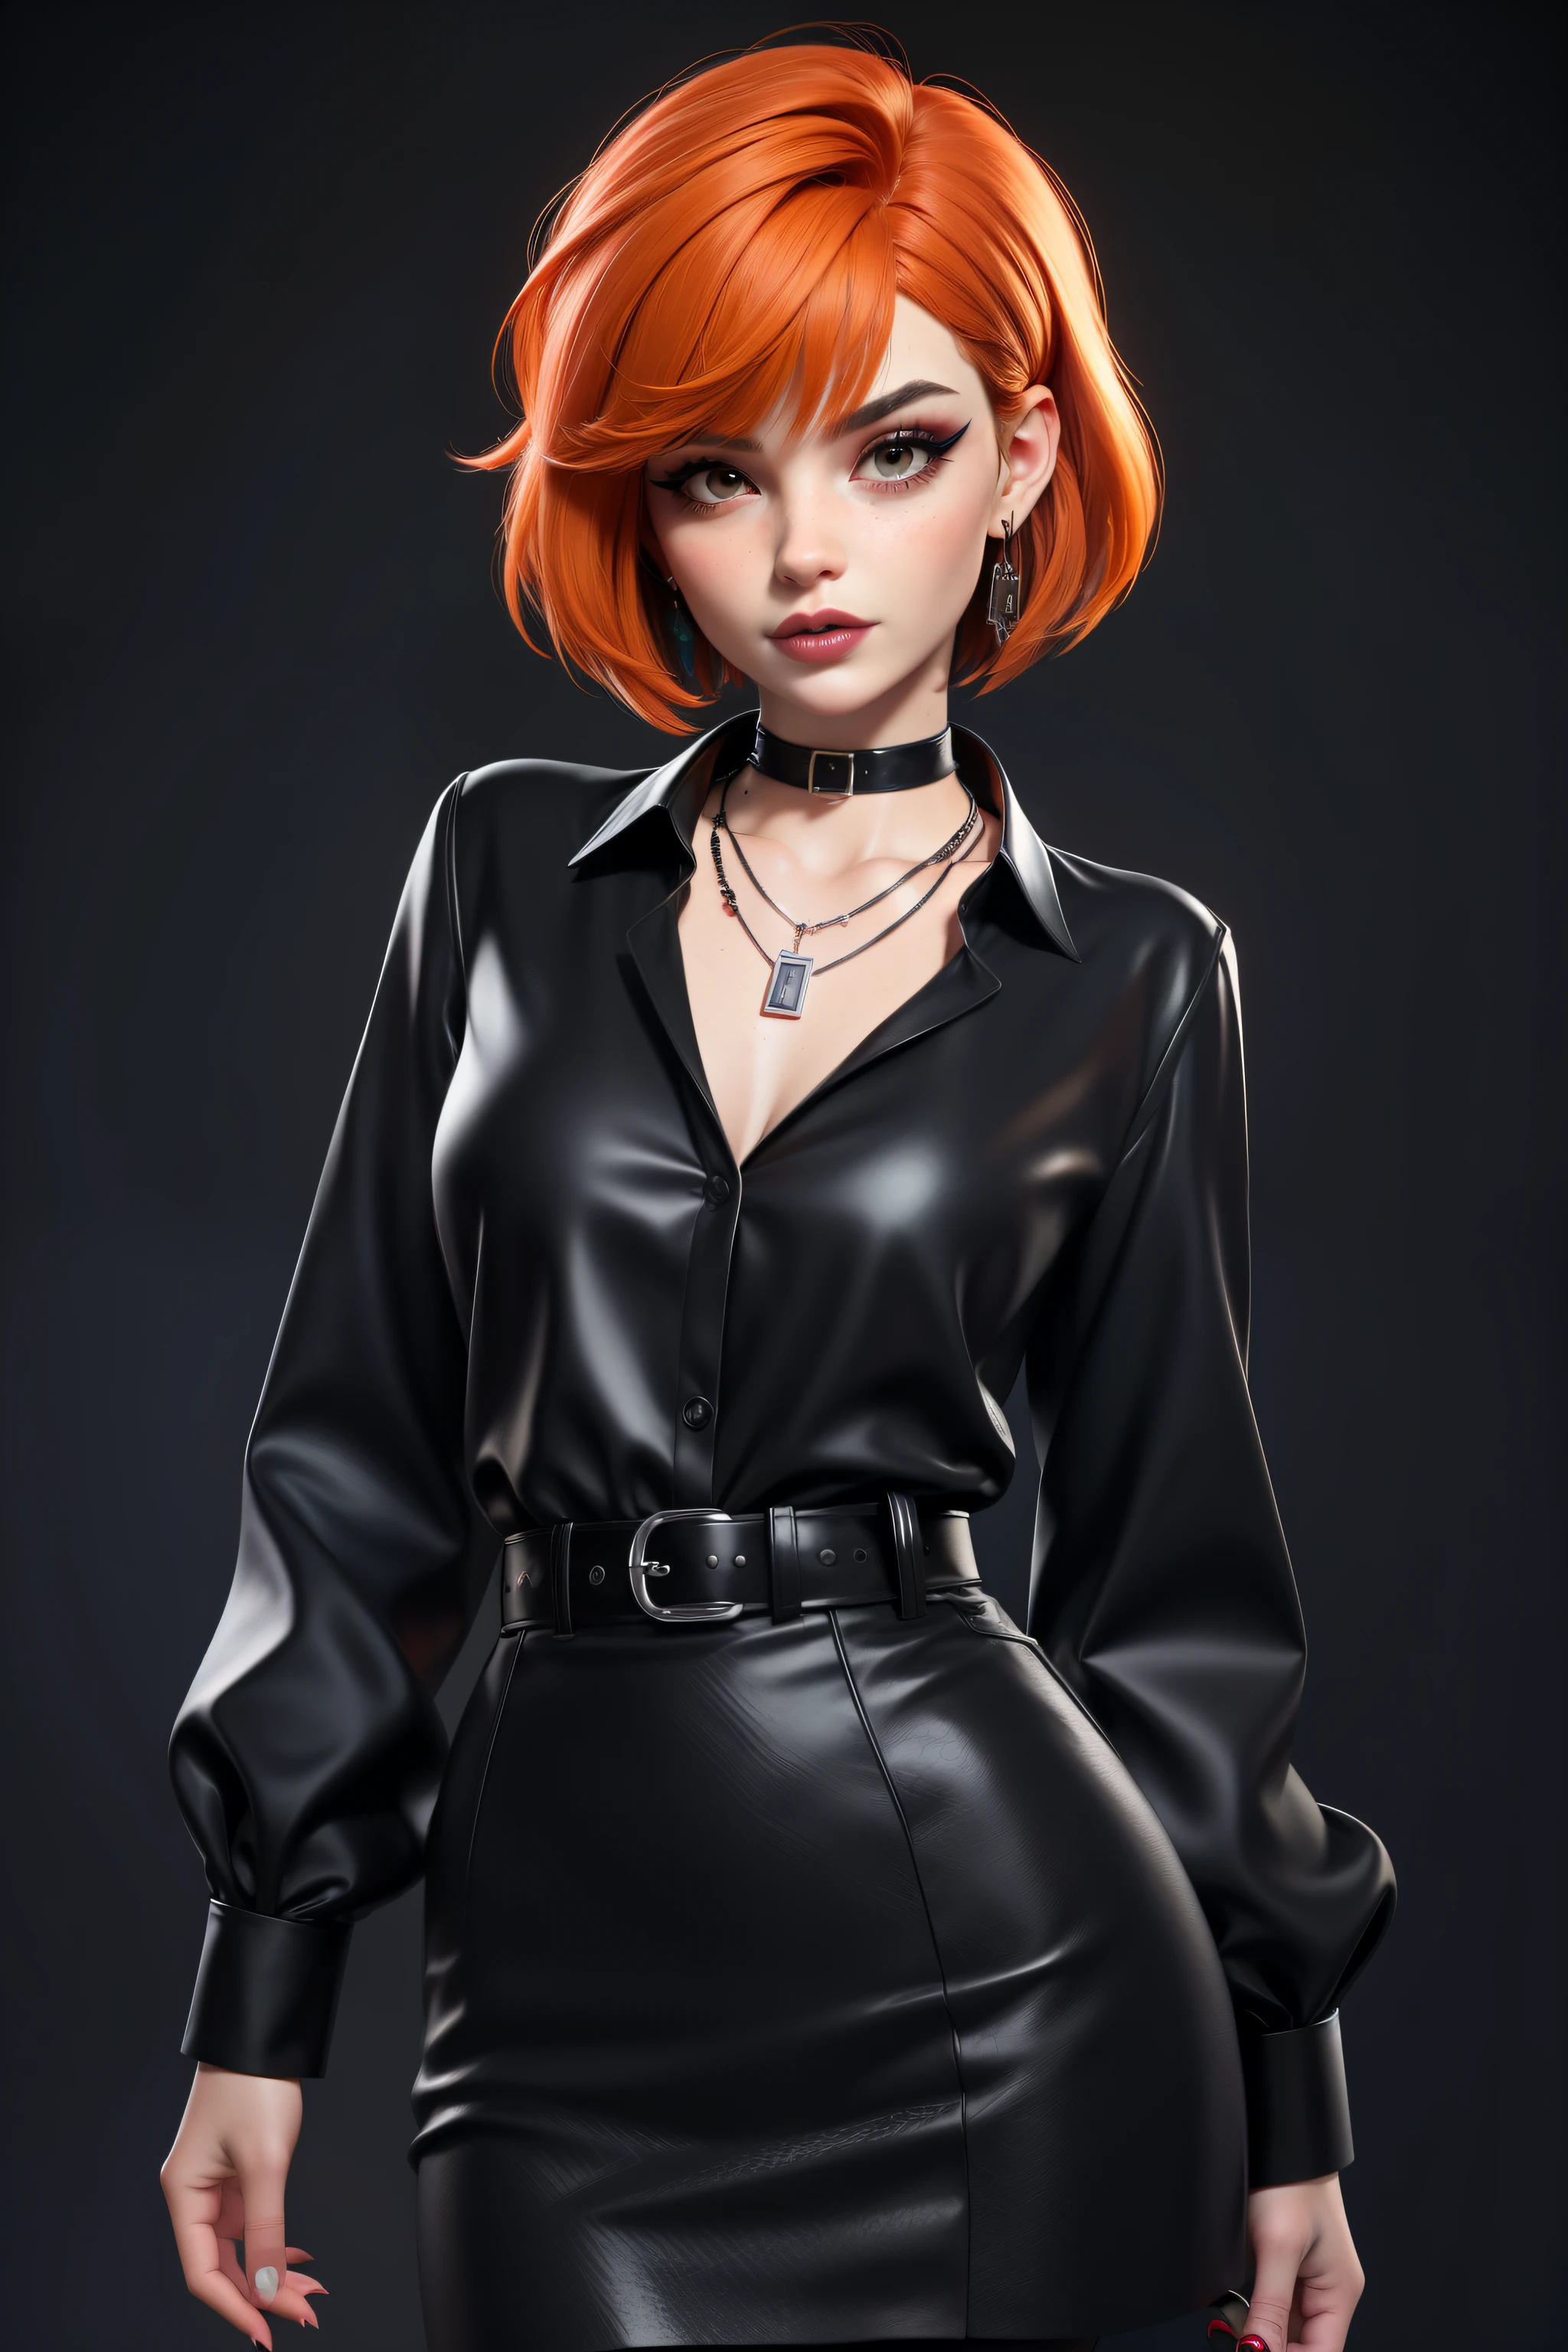 masterpiece, Best Quality,3d rendering work ,3DMM style, Professional Photography, 3D,1 girl, Alone, multicolor fur, Orange hair, black fur, collar, parts, jewelry, two tone hair, looking to the side, lustful look, realist, Whole body, simple background, hits, looking away, short hair, parted Lips, black eyes, Lips, Gothic, choker, make up, mole, black shirt, shirt, watermark, fashion dress, post punk, dark wave